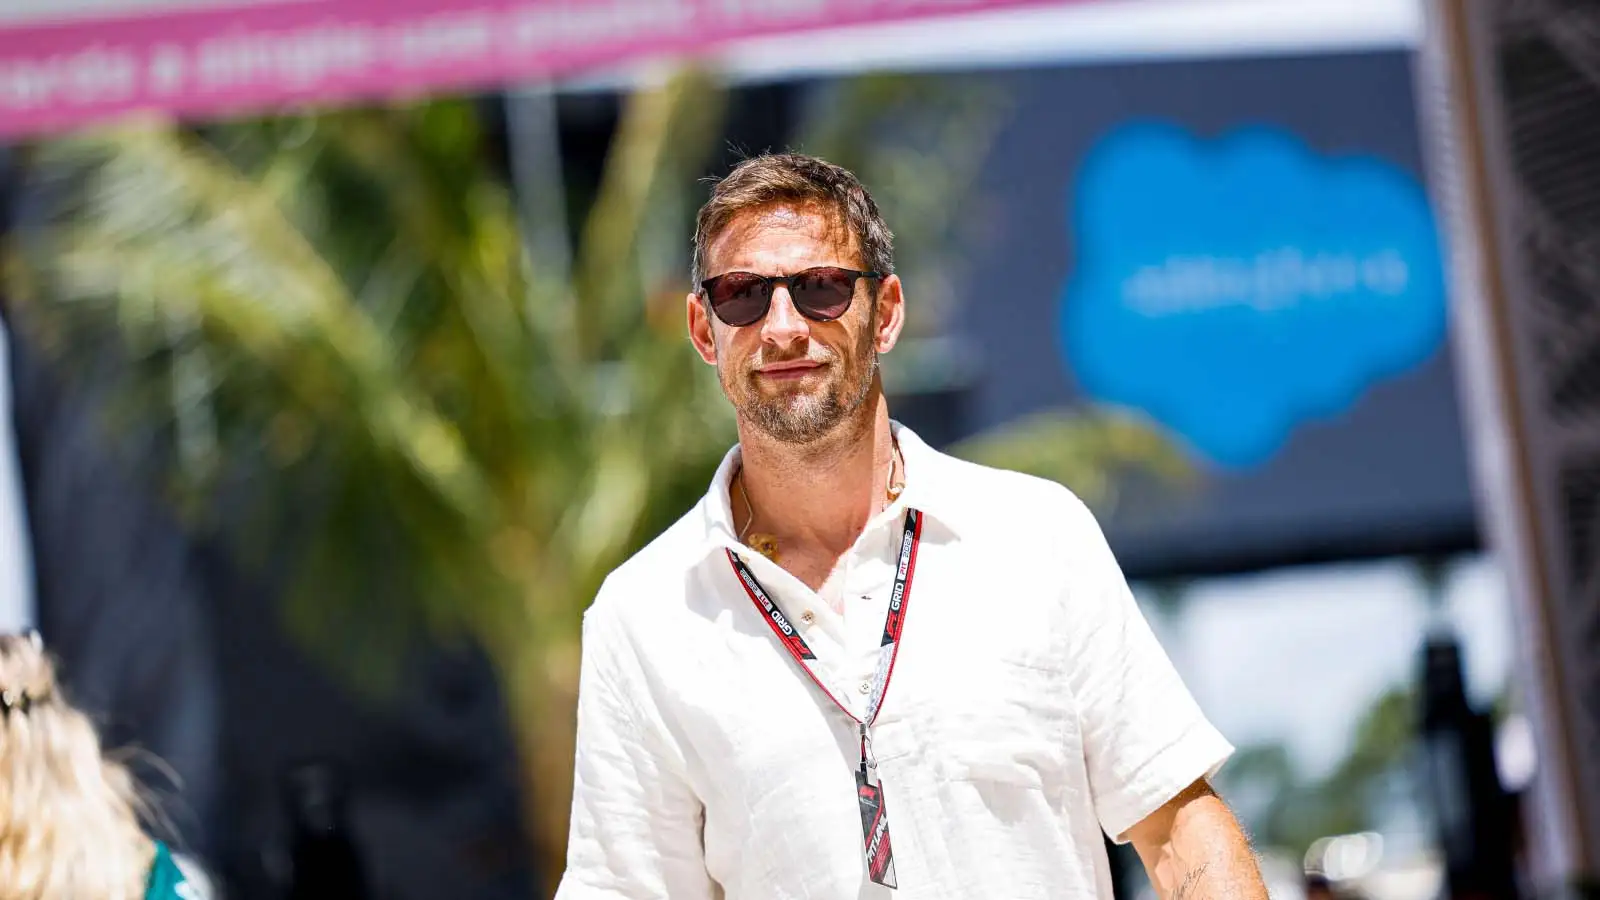 Jenson Button in the F1 paddock.